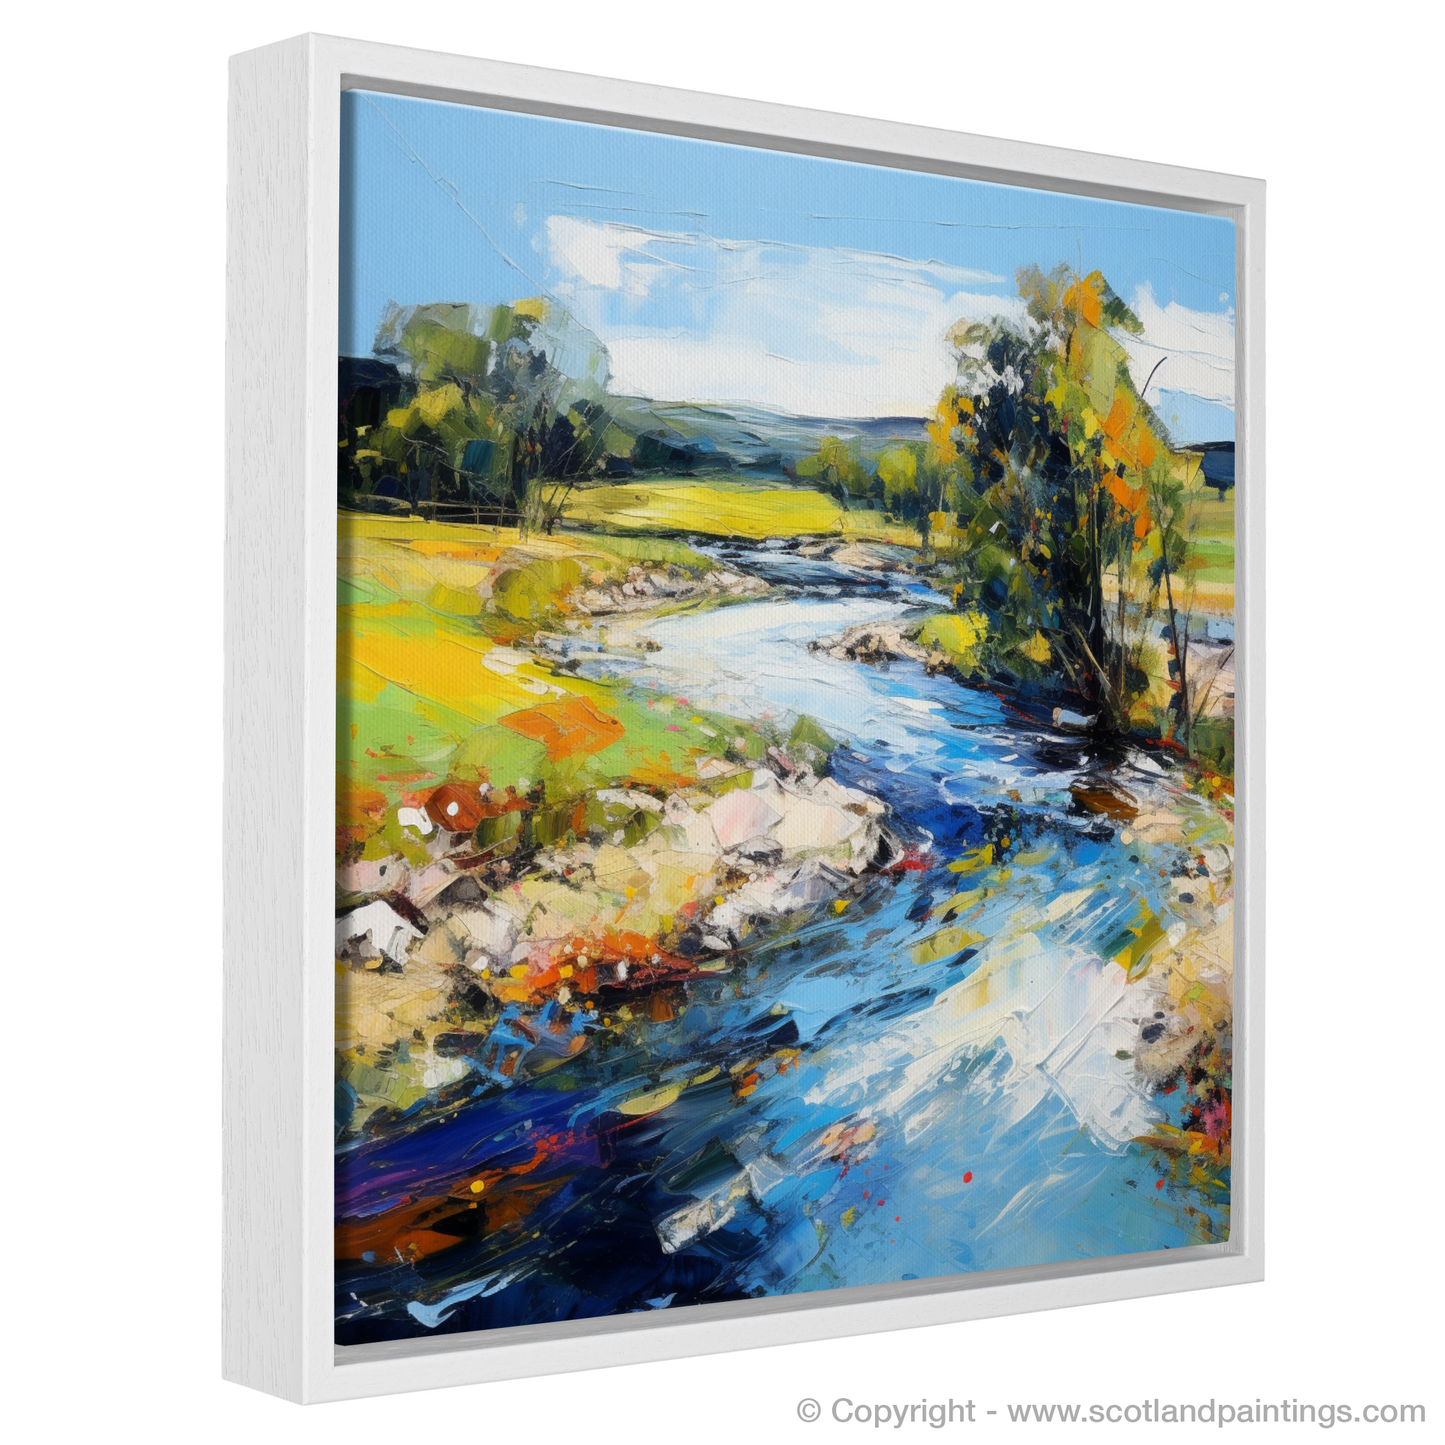 Painting and Art Print of River Deveron, Aberdeenshire in summer entitled "Summer Rhapsody on the River Deveron".